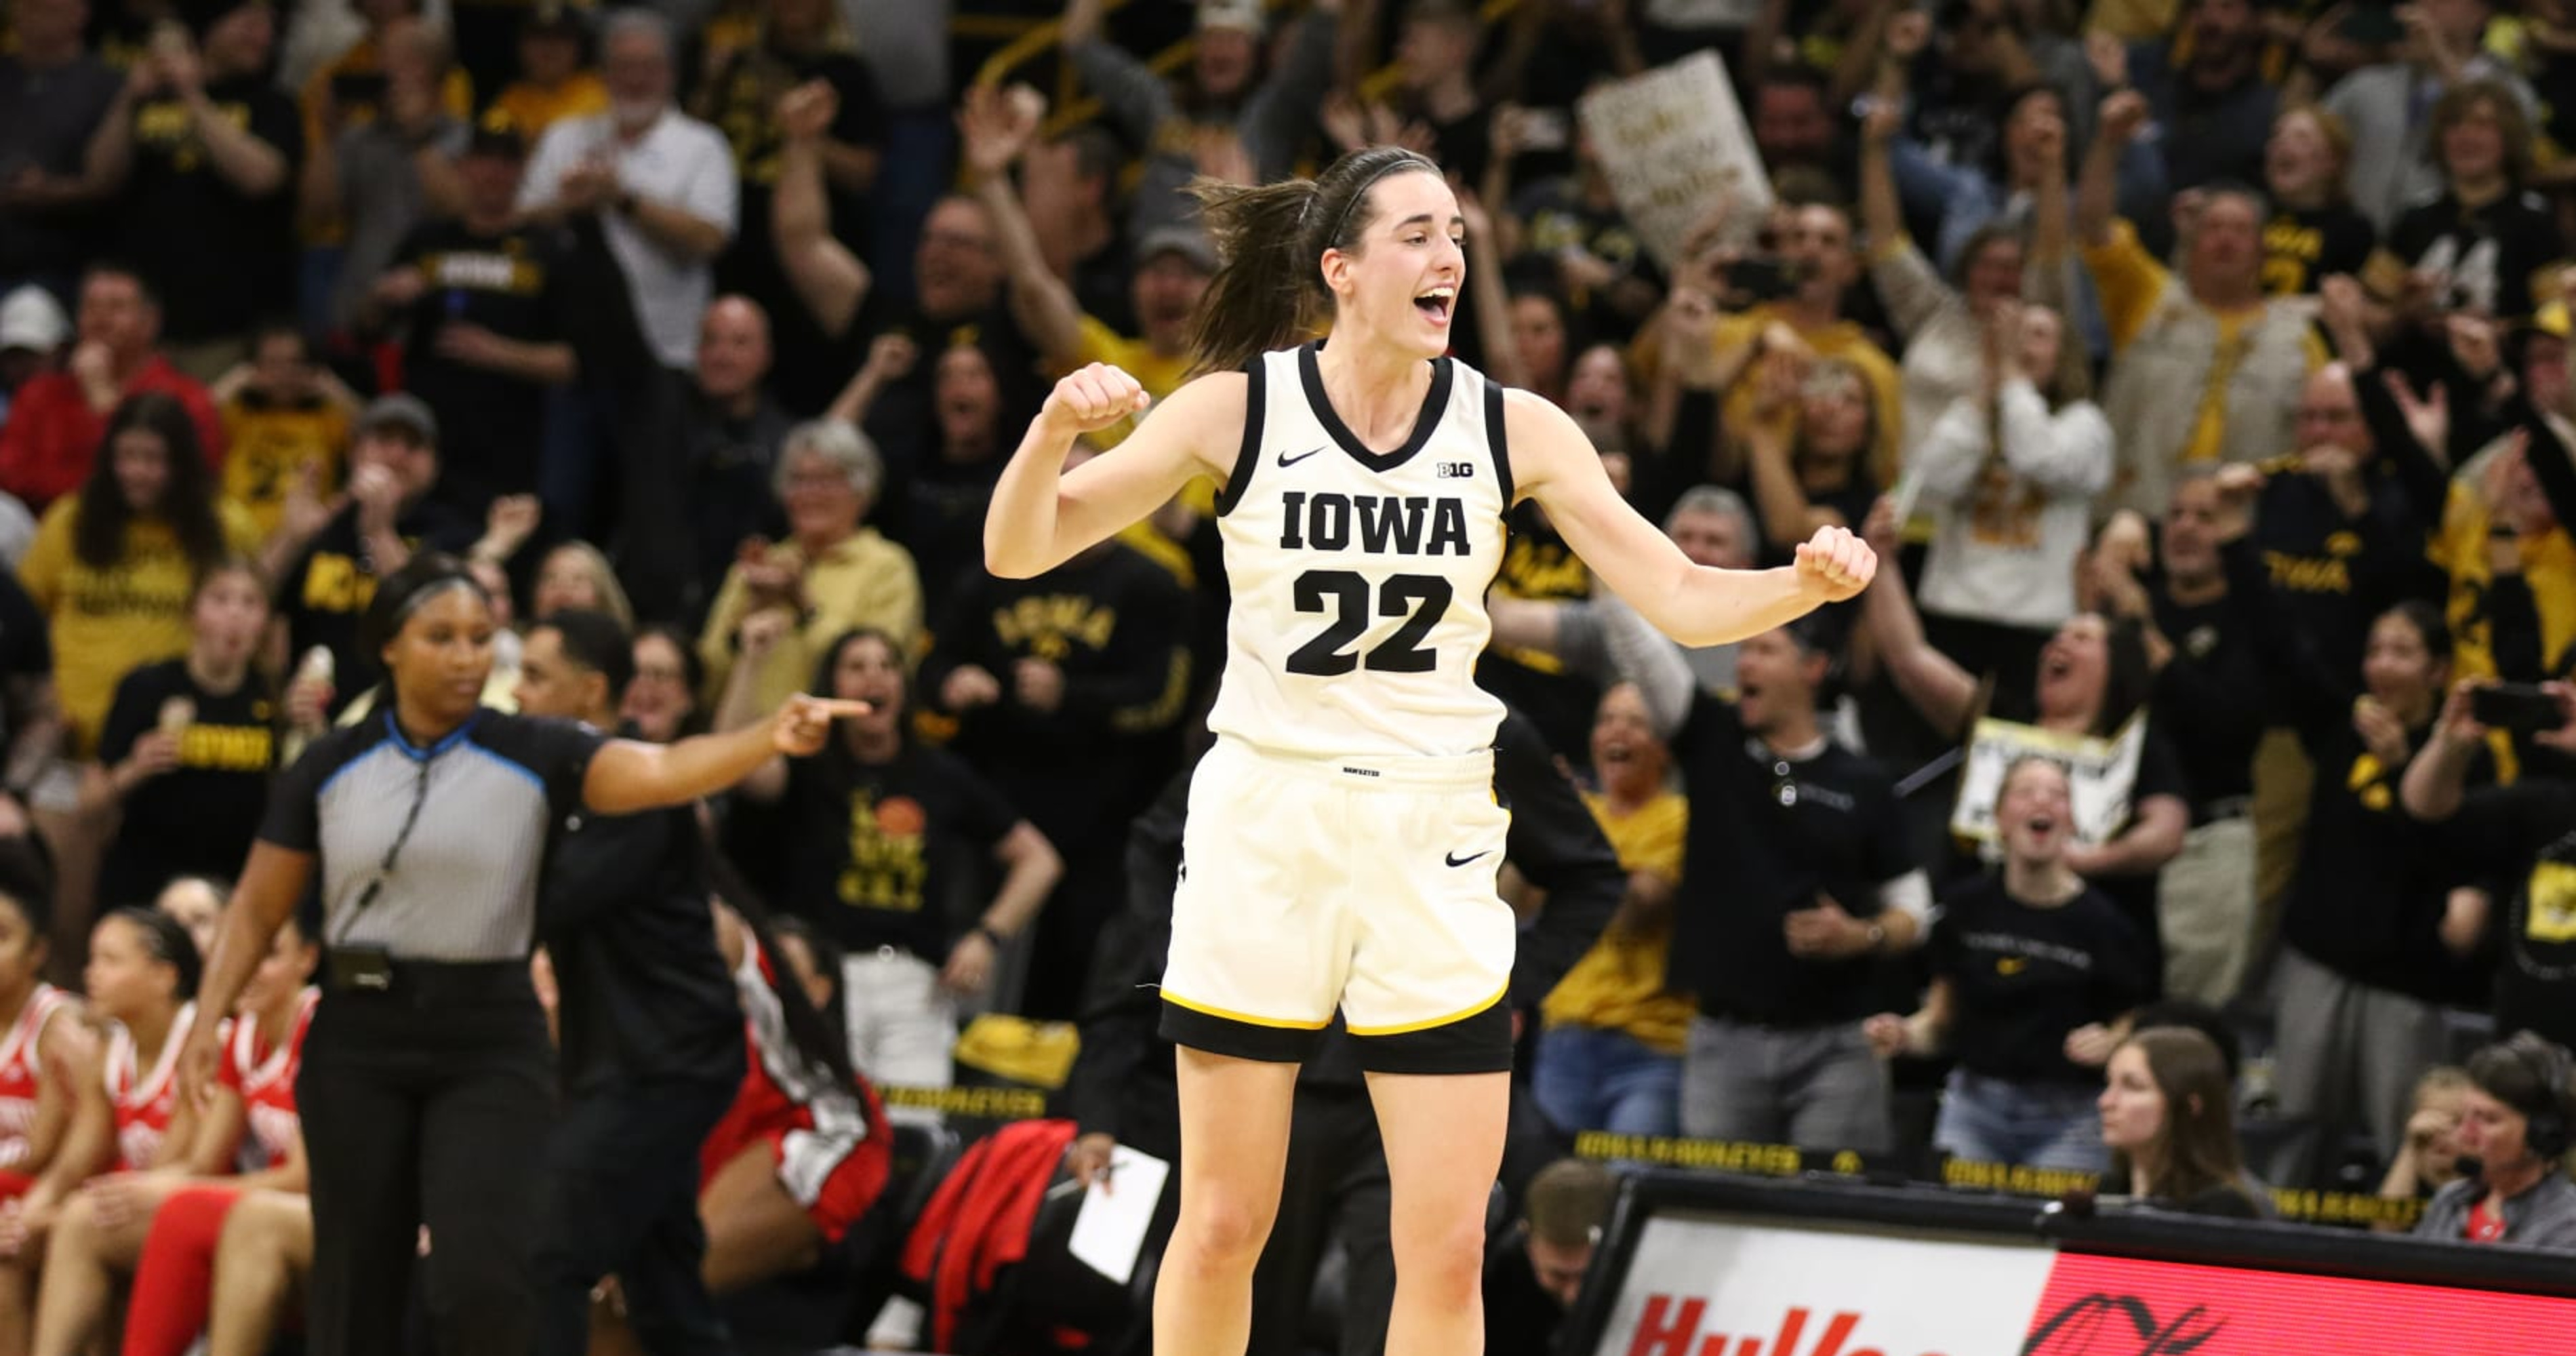 Caitlin Clark: 'I Would've Laughed' If Someone Said I'd Break NCAA Scoring Record